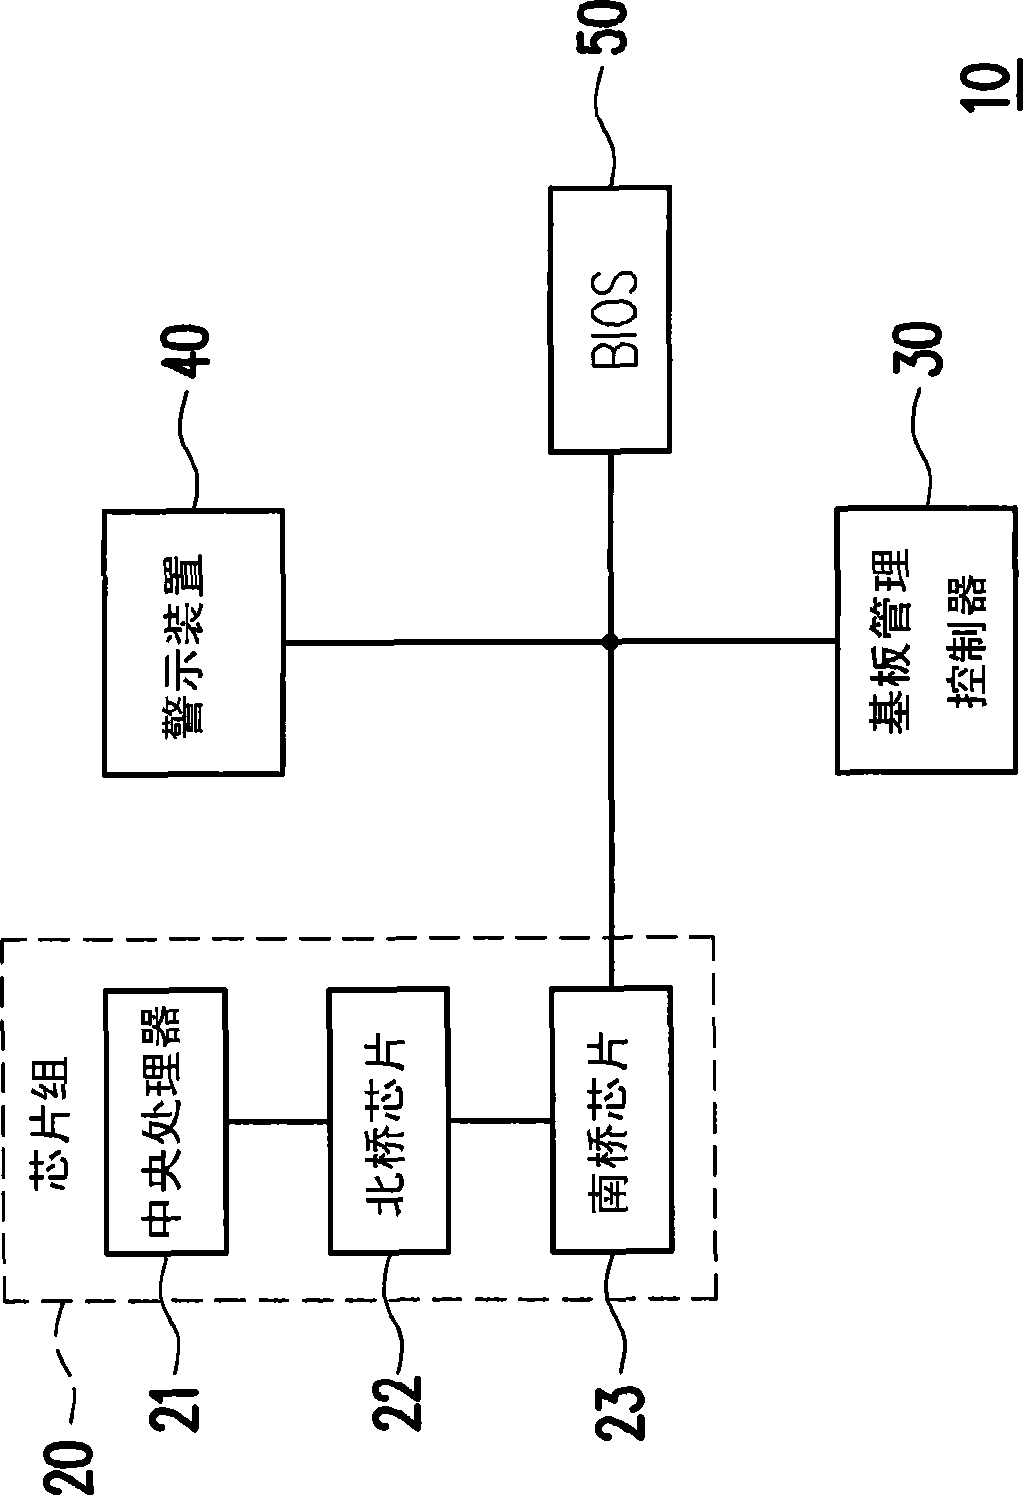 Evaluation method for main unit and its status